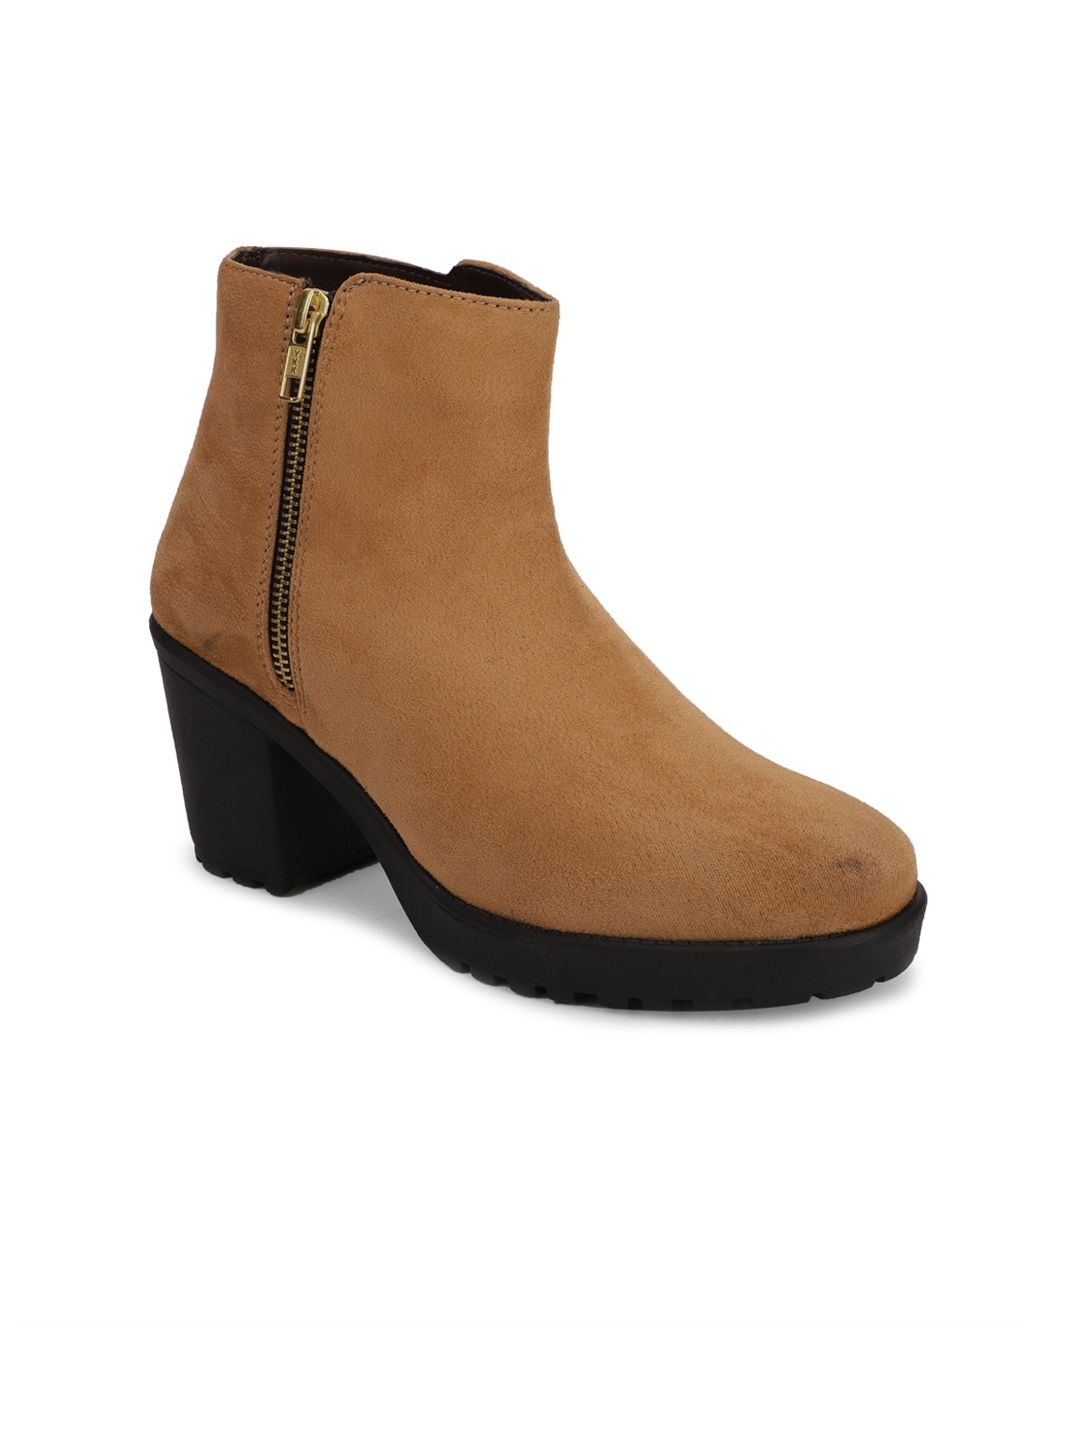 Bruno Manetti Beige Suede Block Heeled Boots Price in India